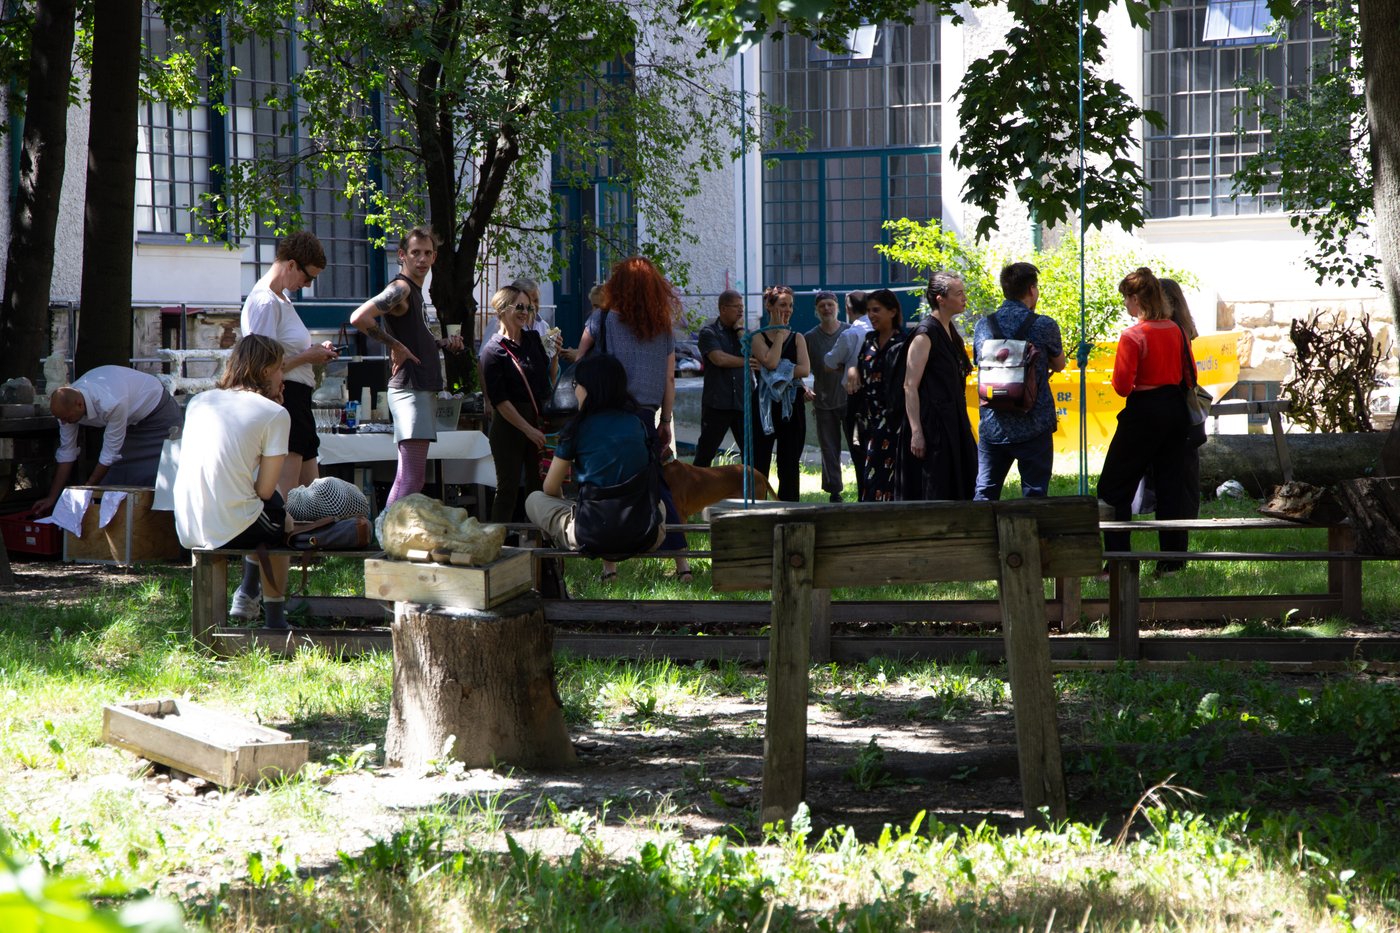 People stand at a solemn gathering in a green courtyard. It is summer, benches and a table with drinks have been set up. Between them are equipment and boxes, parts of sculptures. In the background you can see the large studio windows of the building.